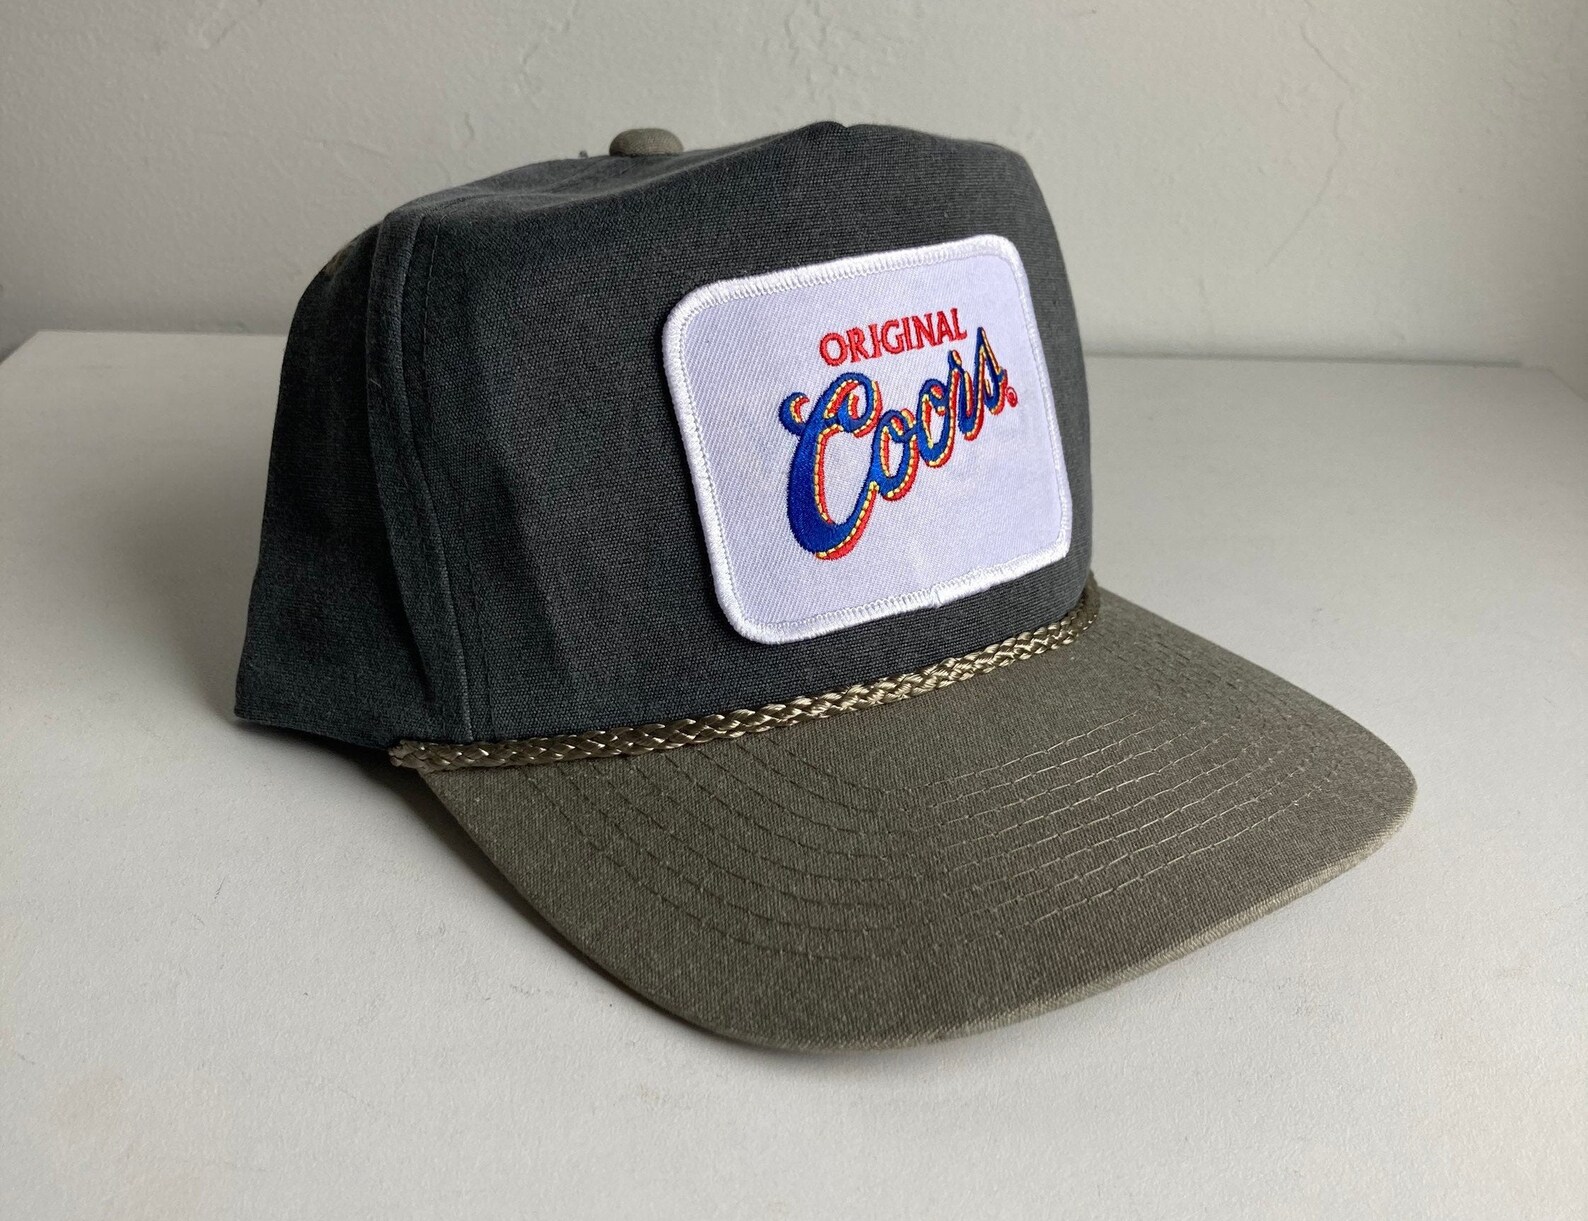 Coors Original Patch on Rope Hat with Snapback | Etsy